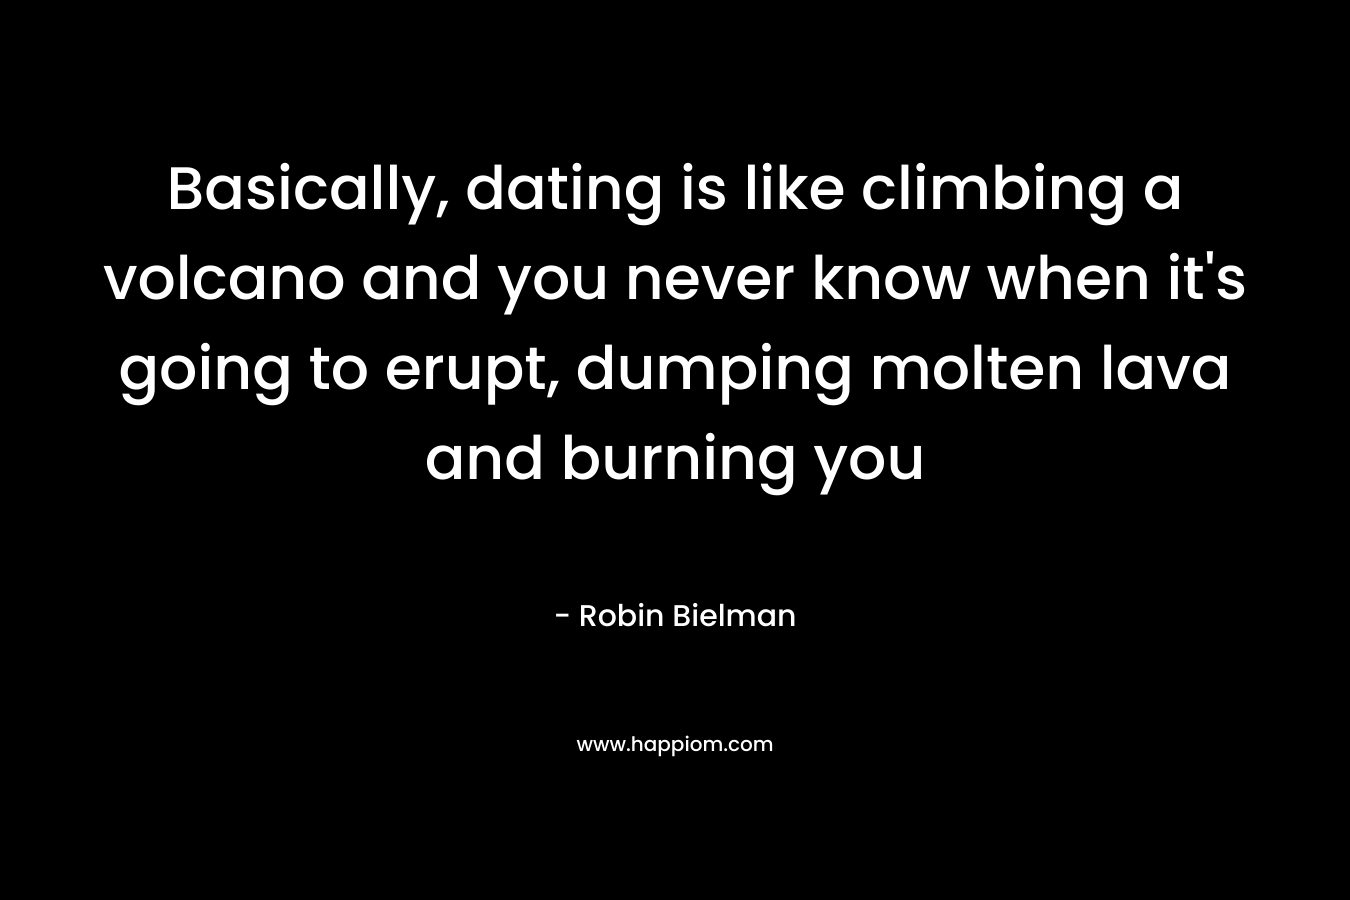 Basically, dating is like climbing a volcano and you never know when it's going to erupt, dumping molten lava and burning you